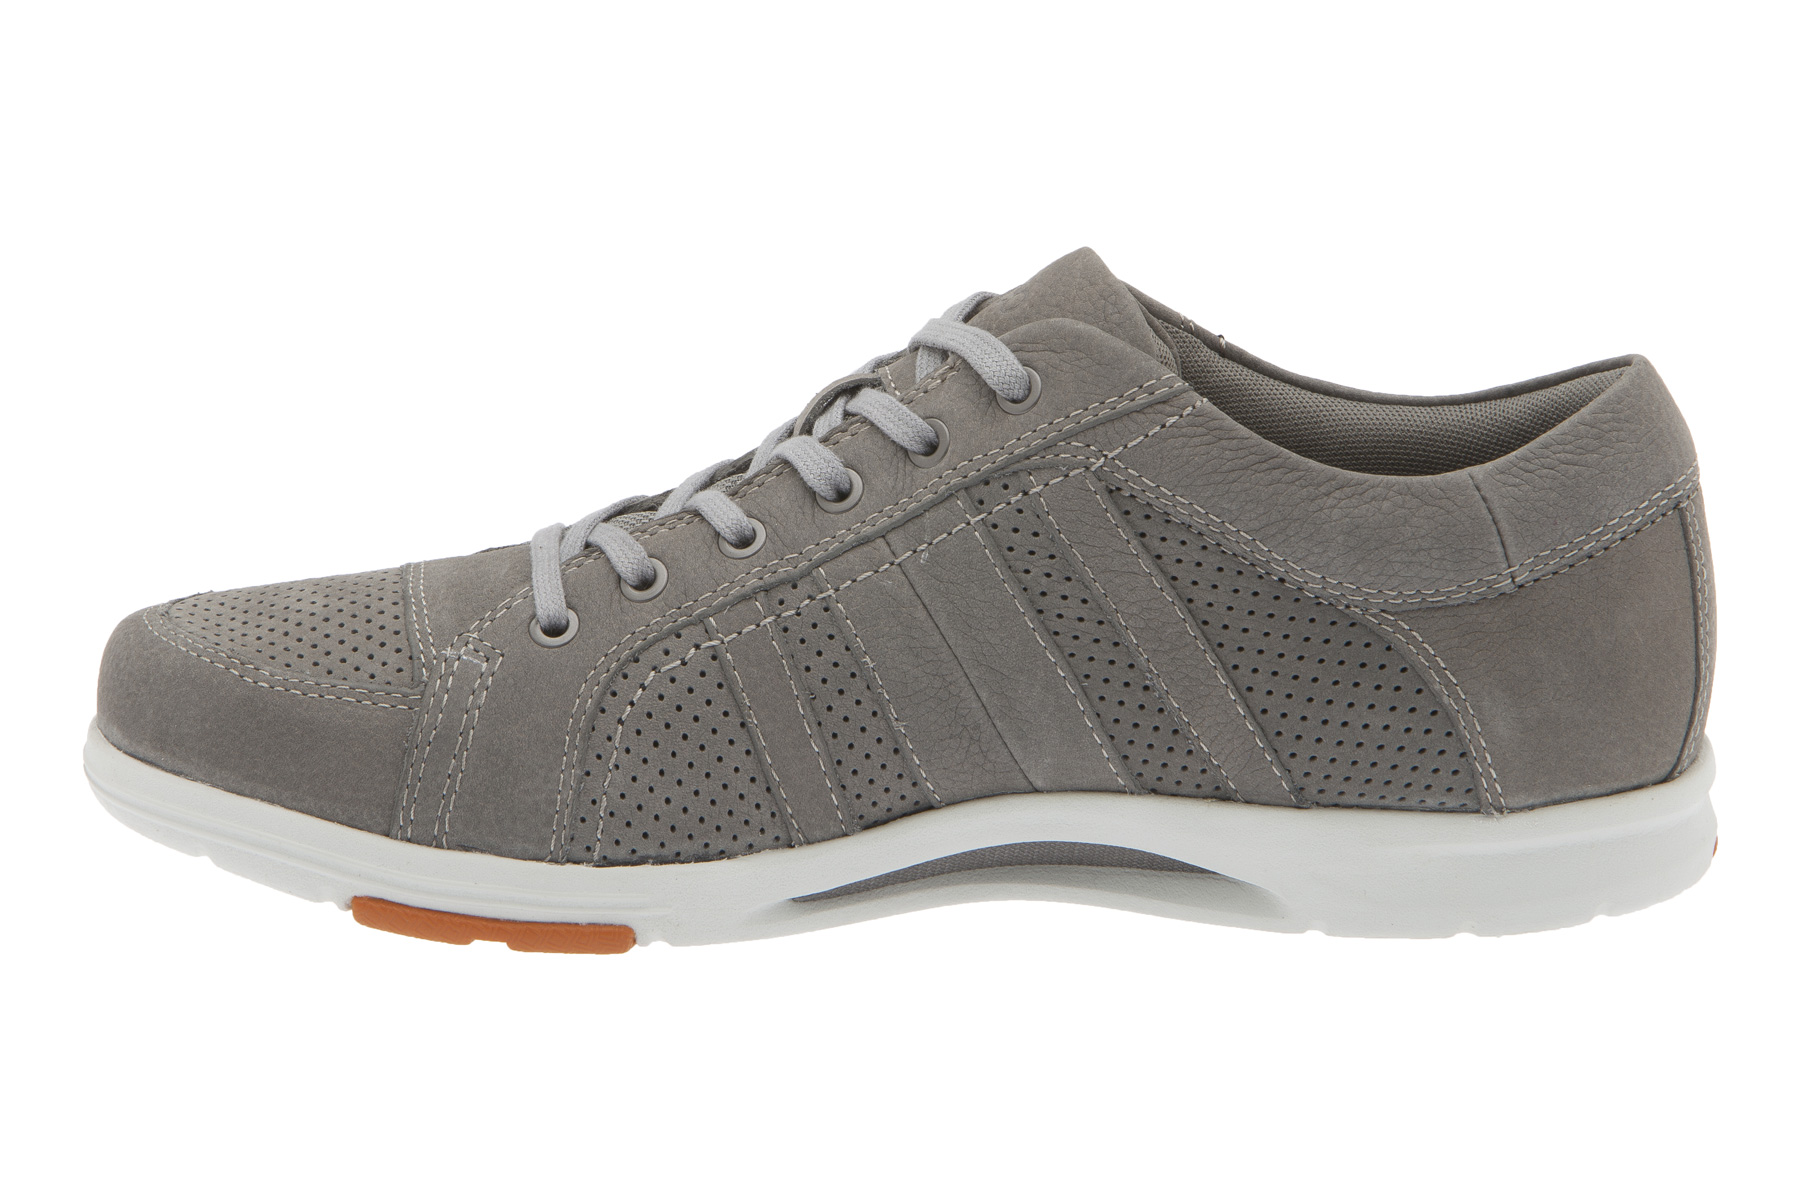 ABEO  Cort - Casual Shoes in Grey - image 4 of 6